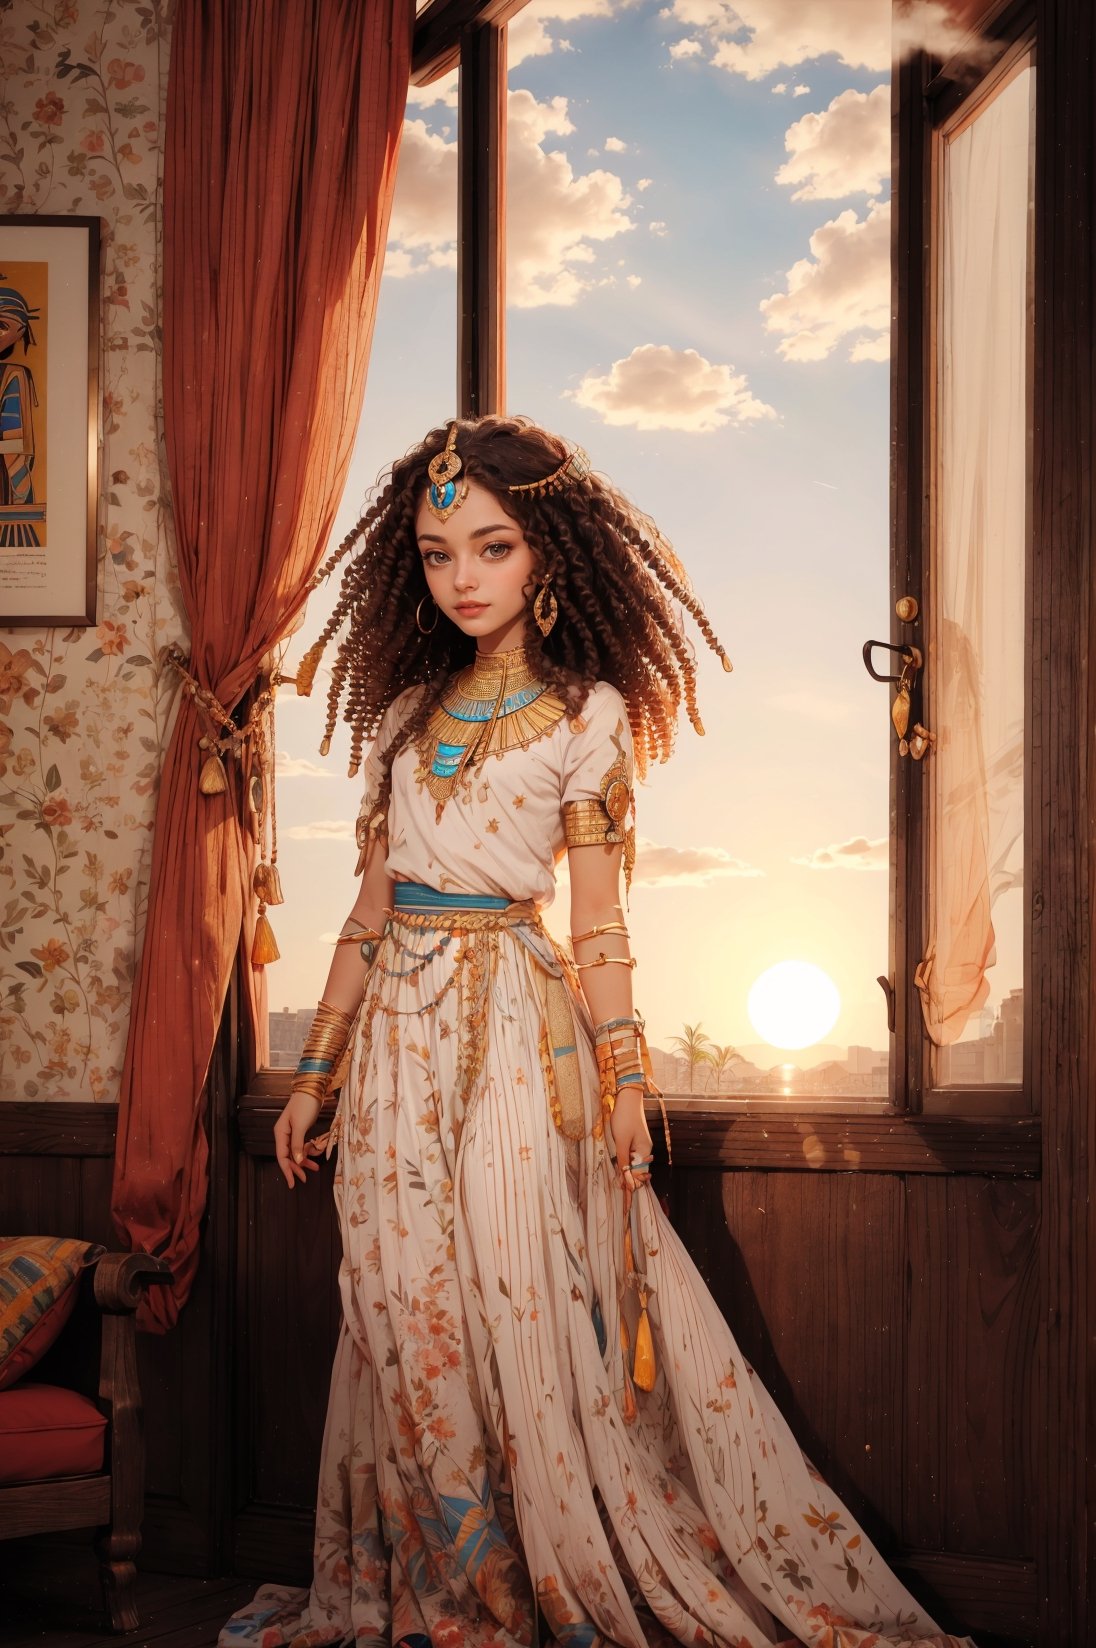 Merit,  beautiful little girl, 6years old,egyption ' ankh  full body   with  curly hair , hazel eyes , character shet 😯  more sheets of the character pose in front of her window and sun set on her face 